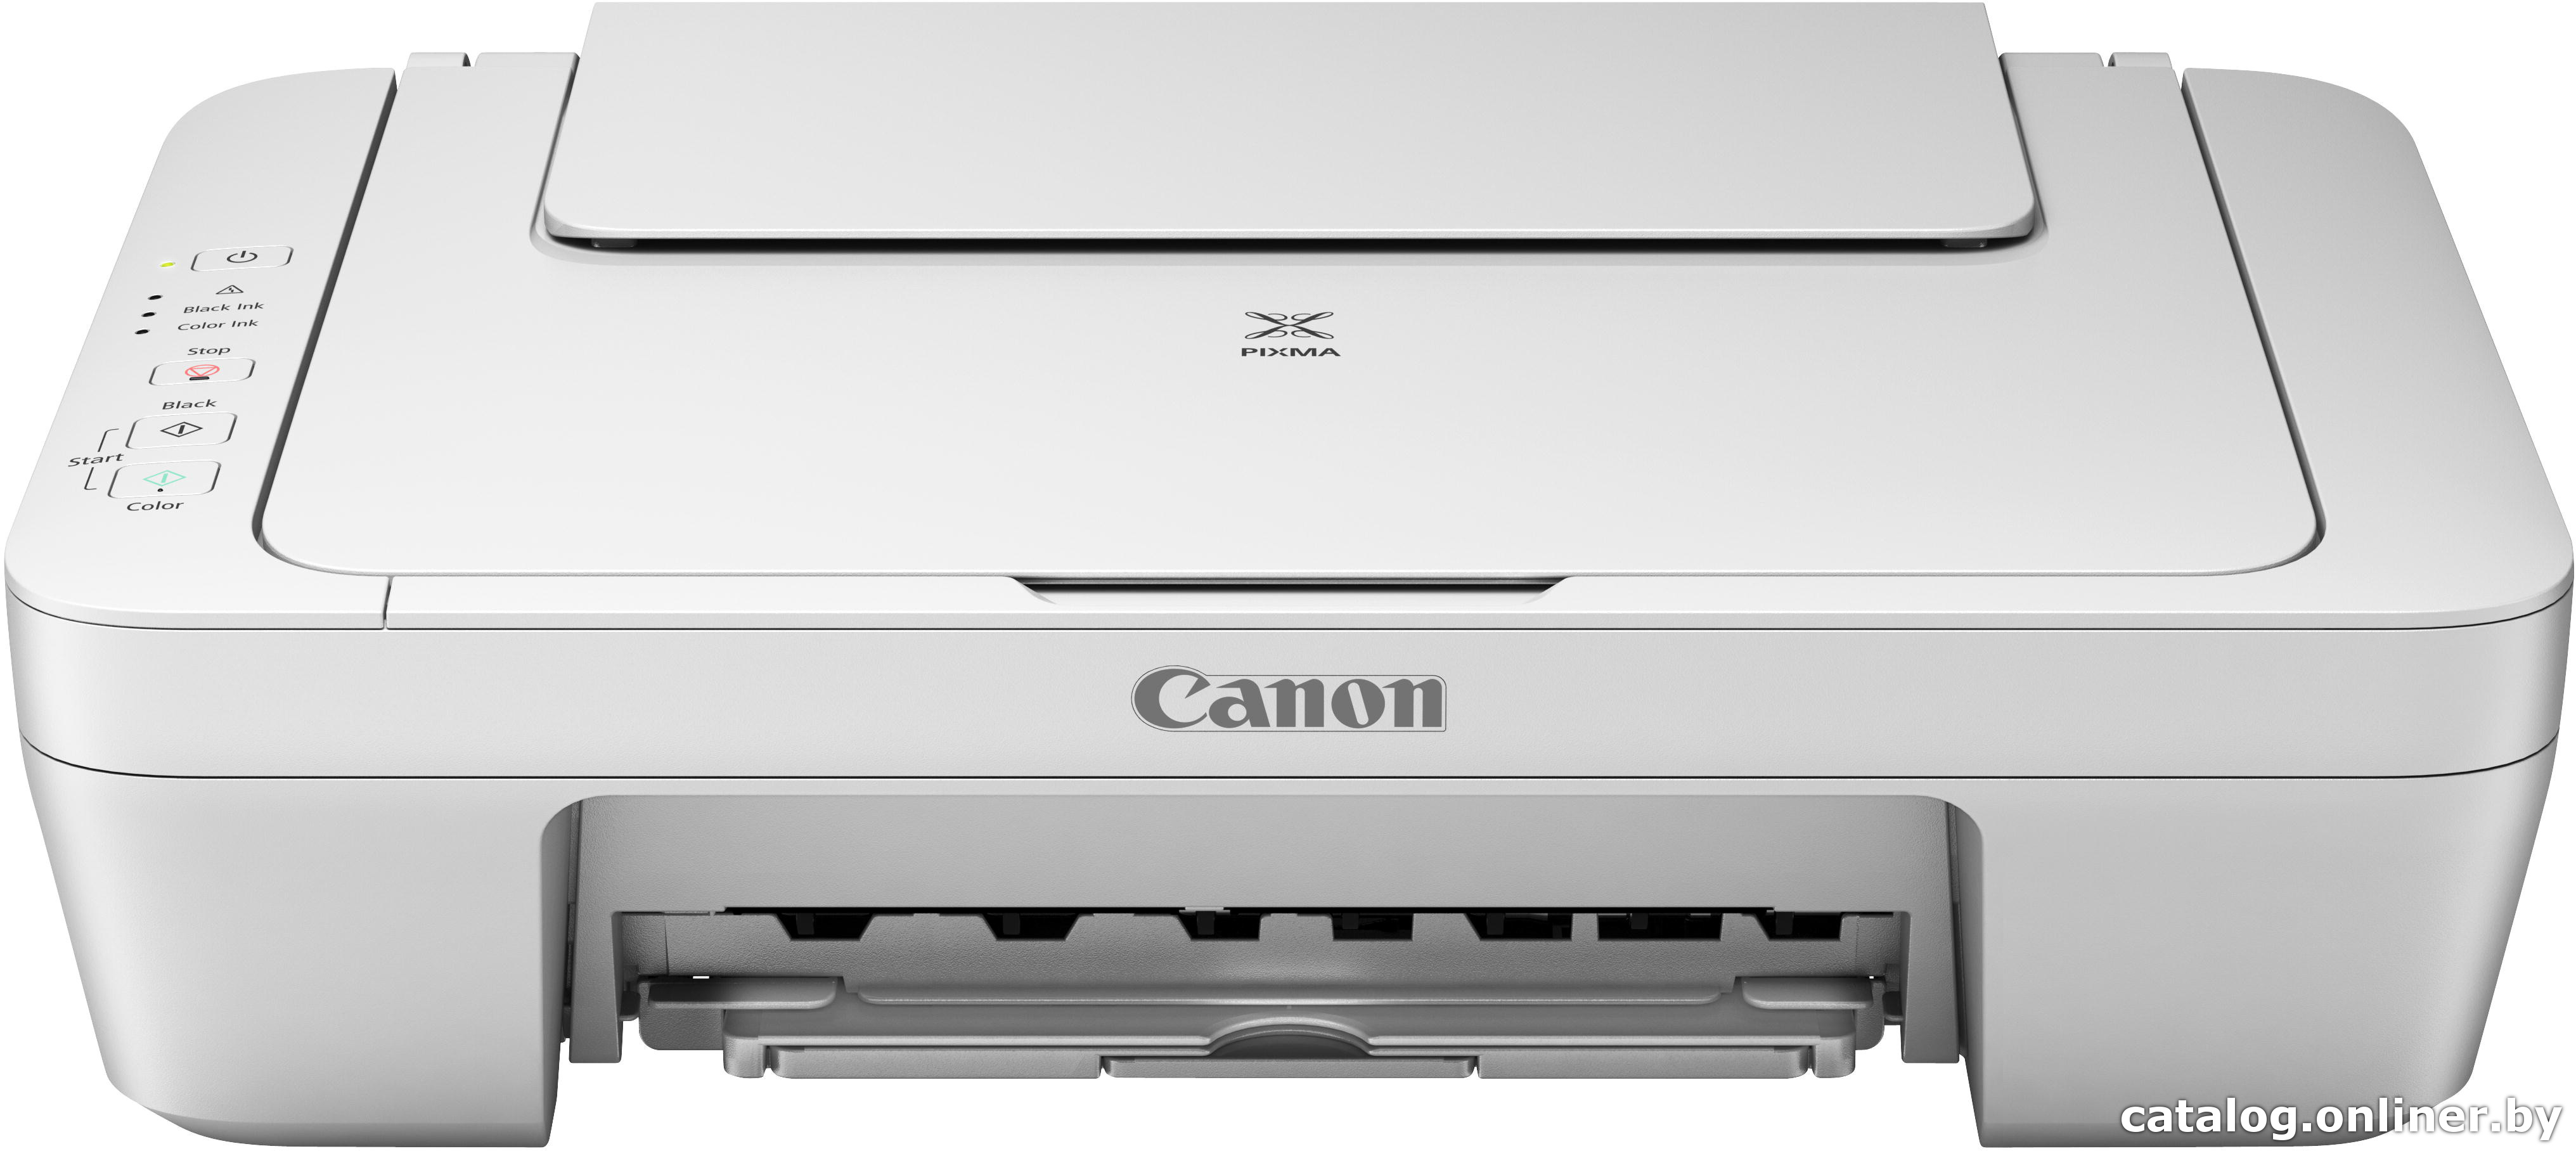 Canon MG2555S Scanner Driver Mac Sierra 10.12 How to Download and Install - Featured